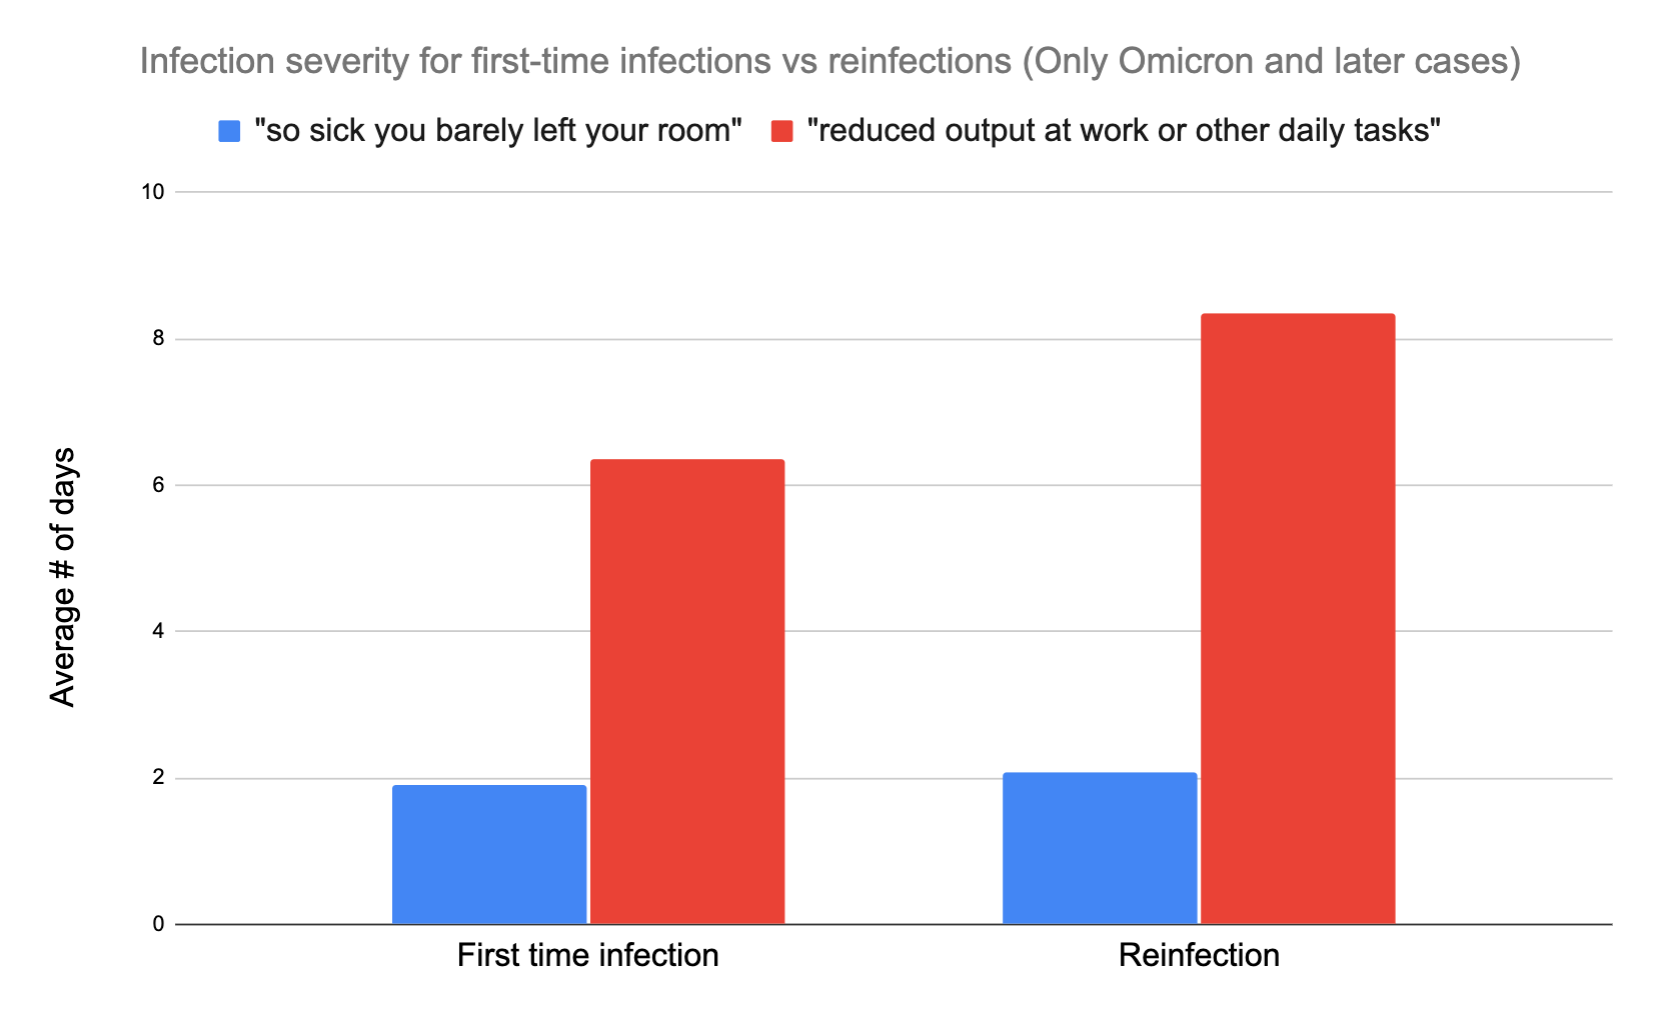 Results of COVID reinfection survey